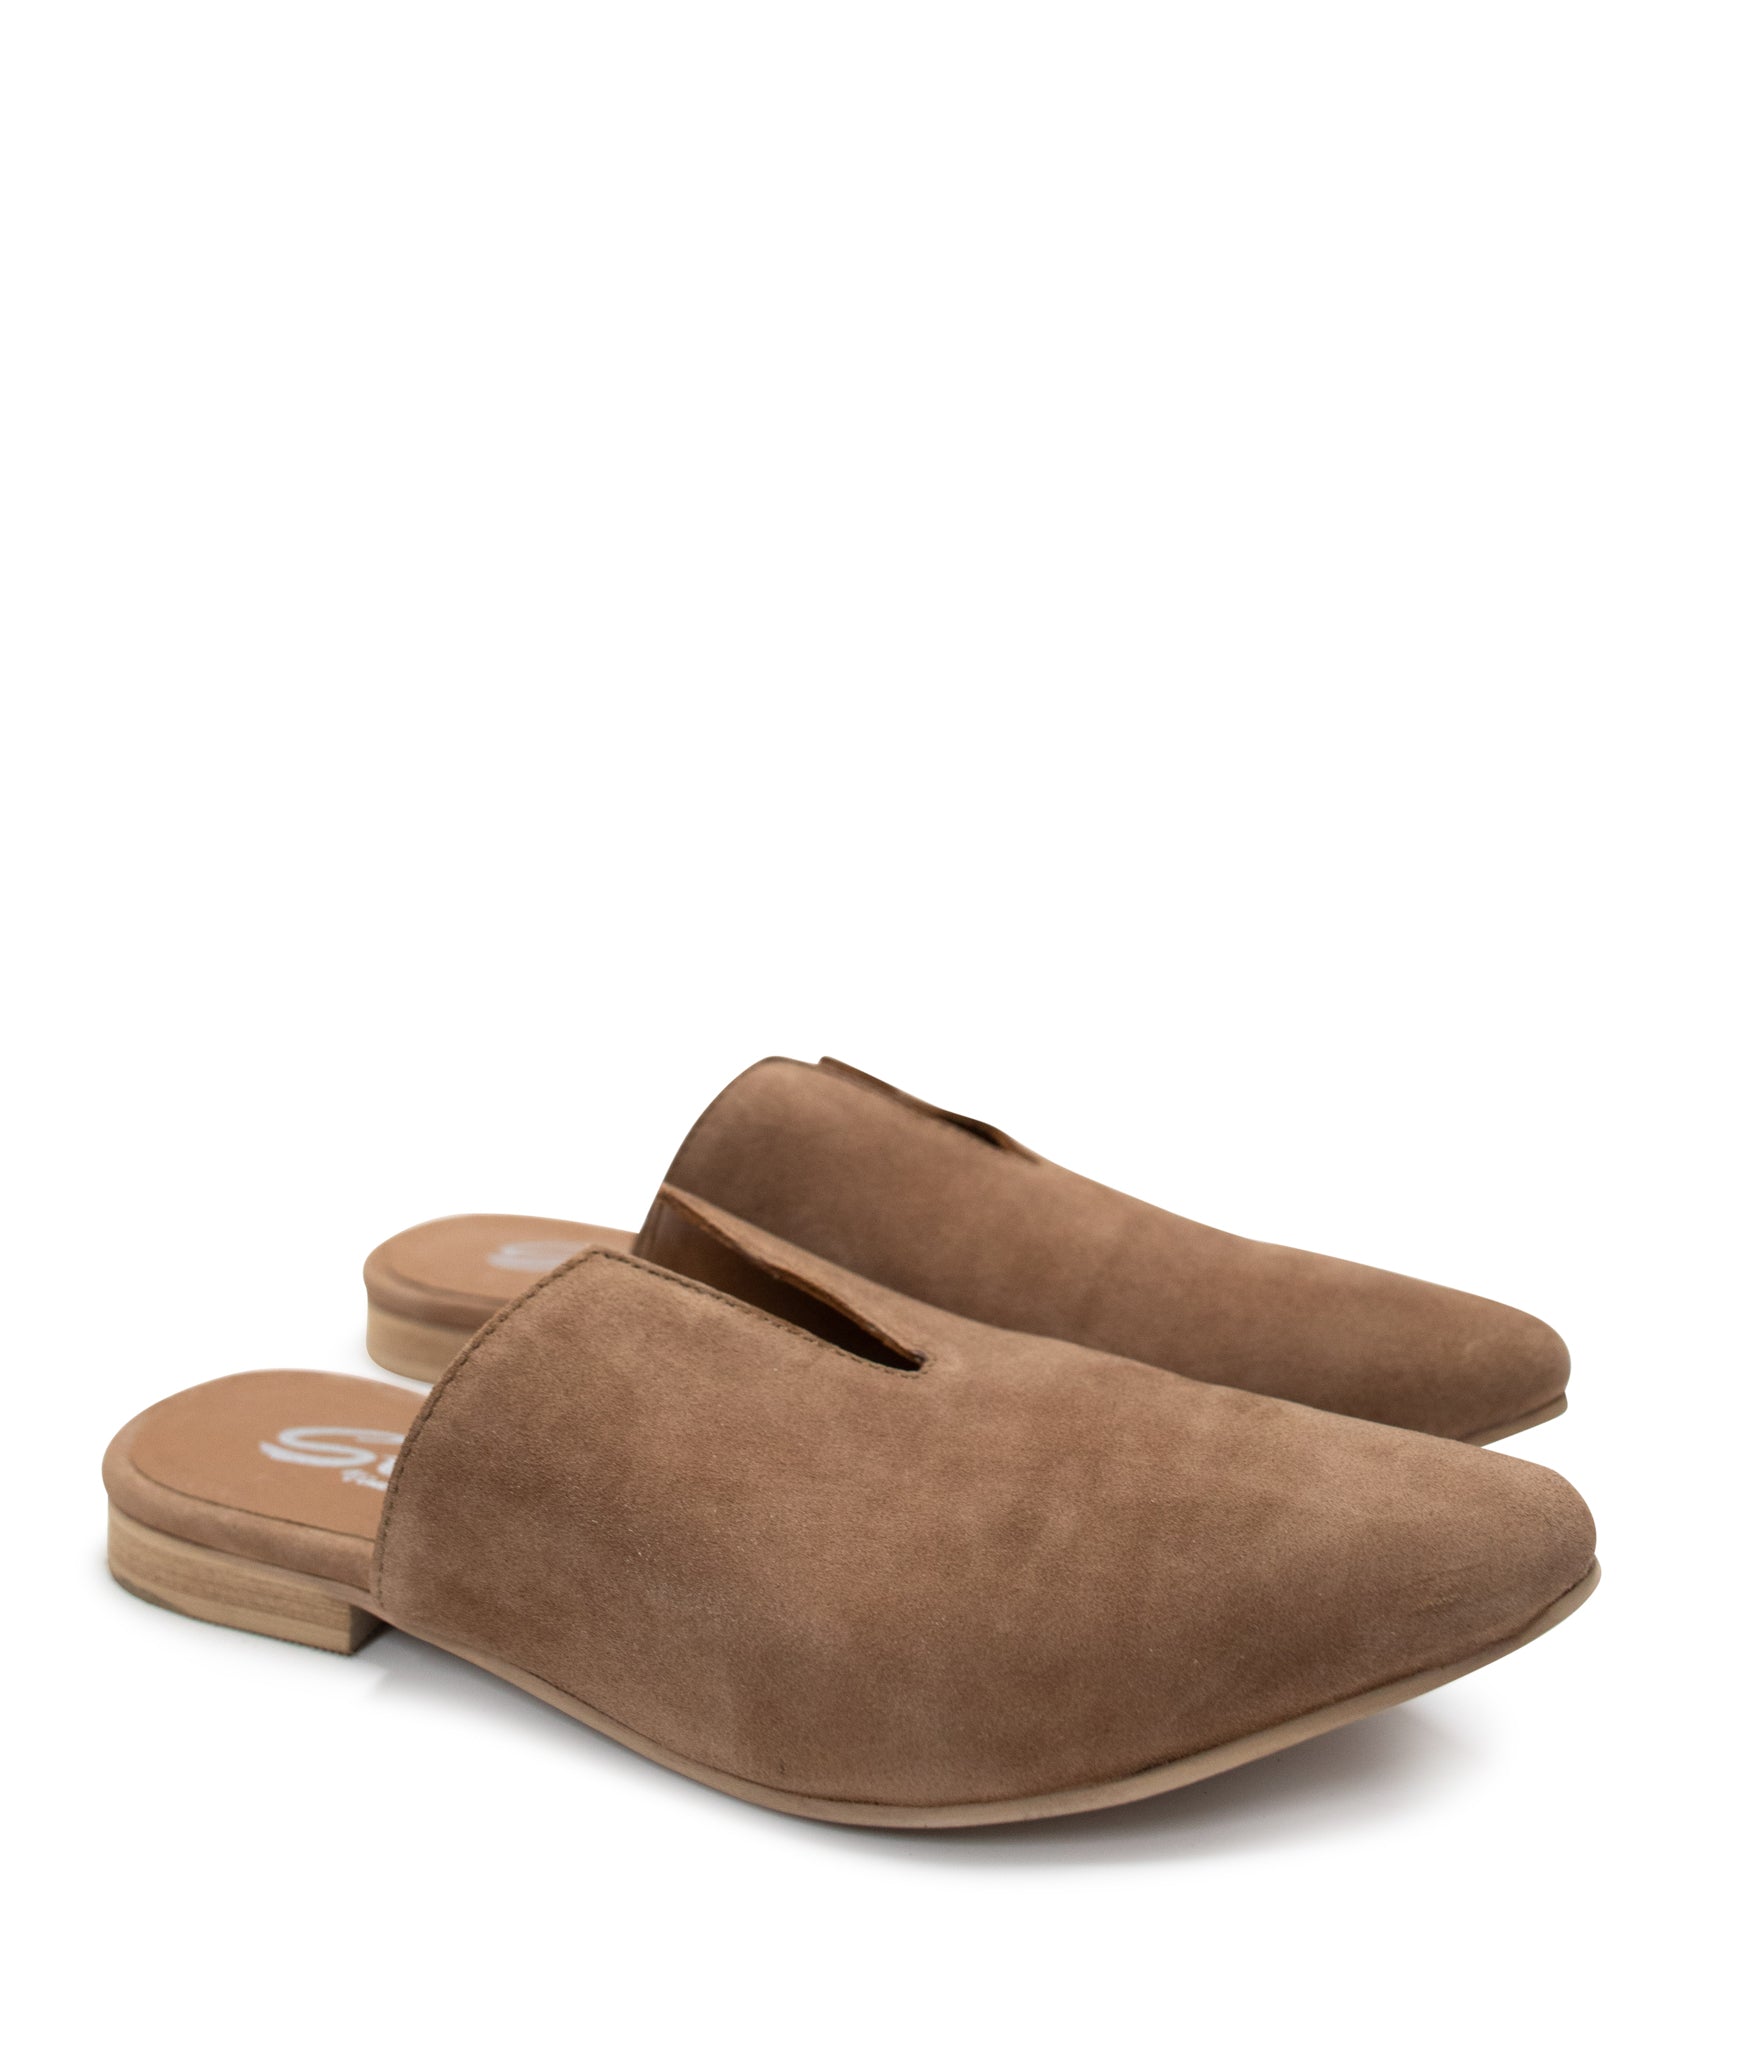 Willimantic Pointed Mule in Taupe Suede